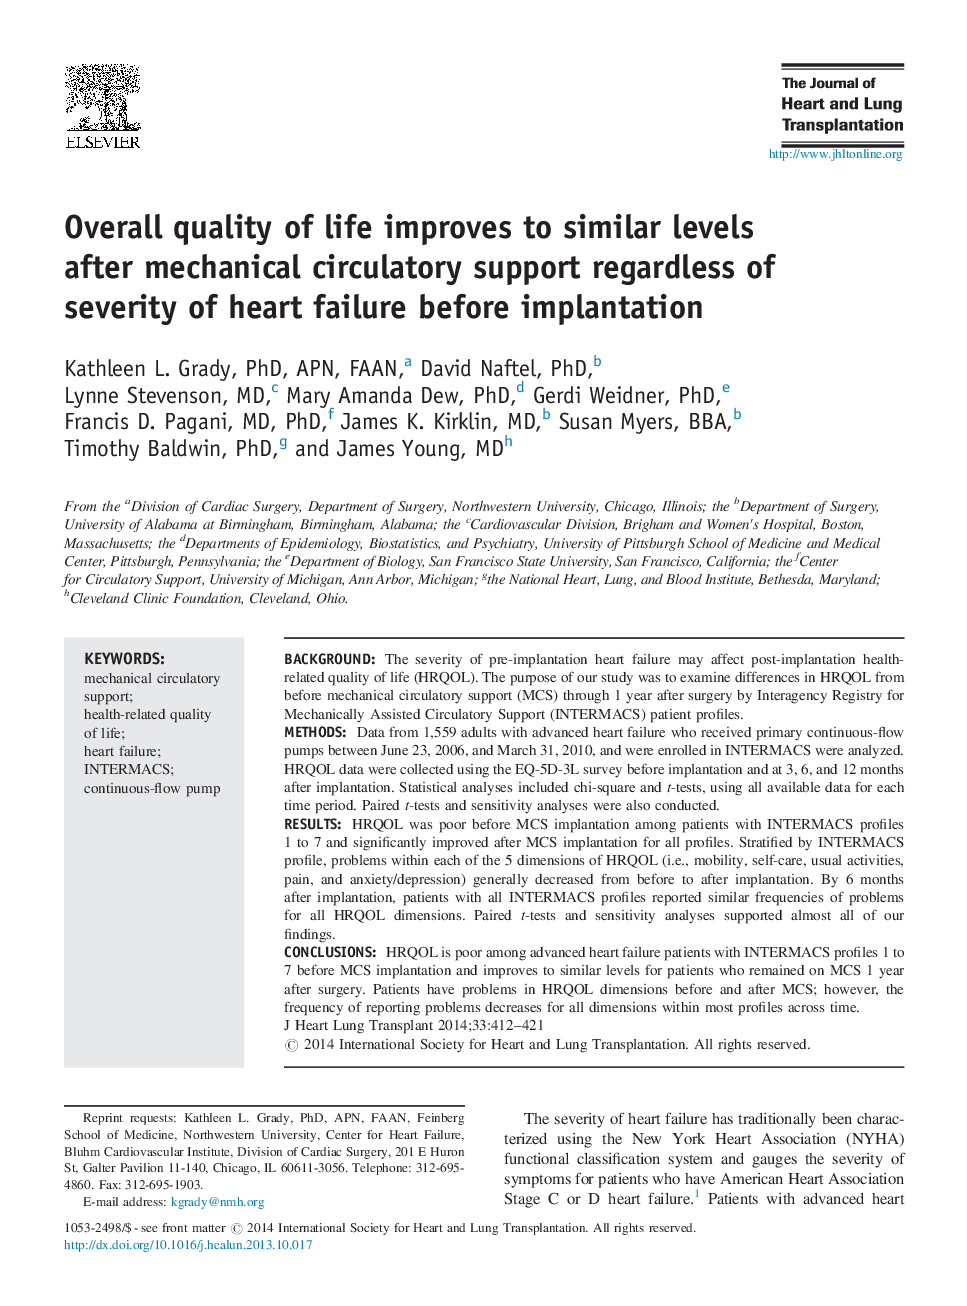 Overall quality of life improves to similar levels after mechanical circulatory support regardless of severity of heart failure before implantation